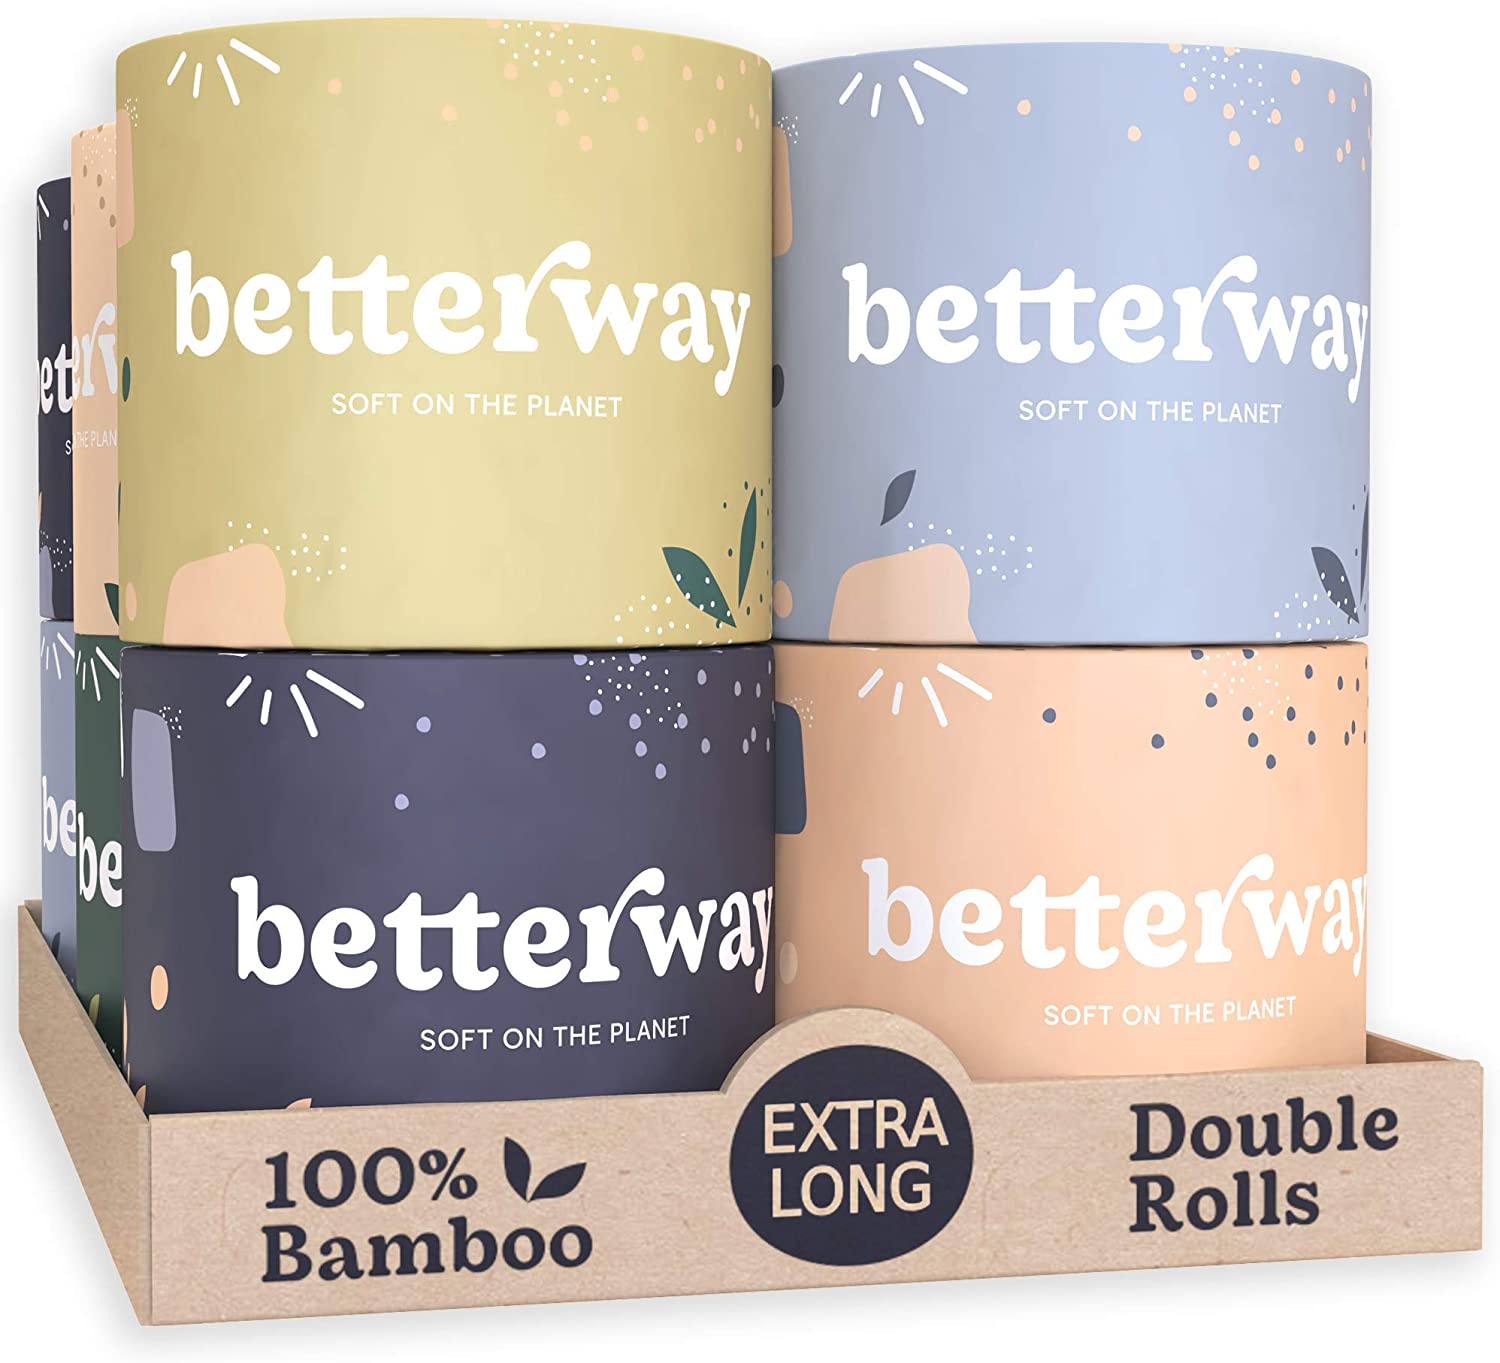 Organic Bamboo Septic Safe Toilet Paper